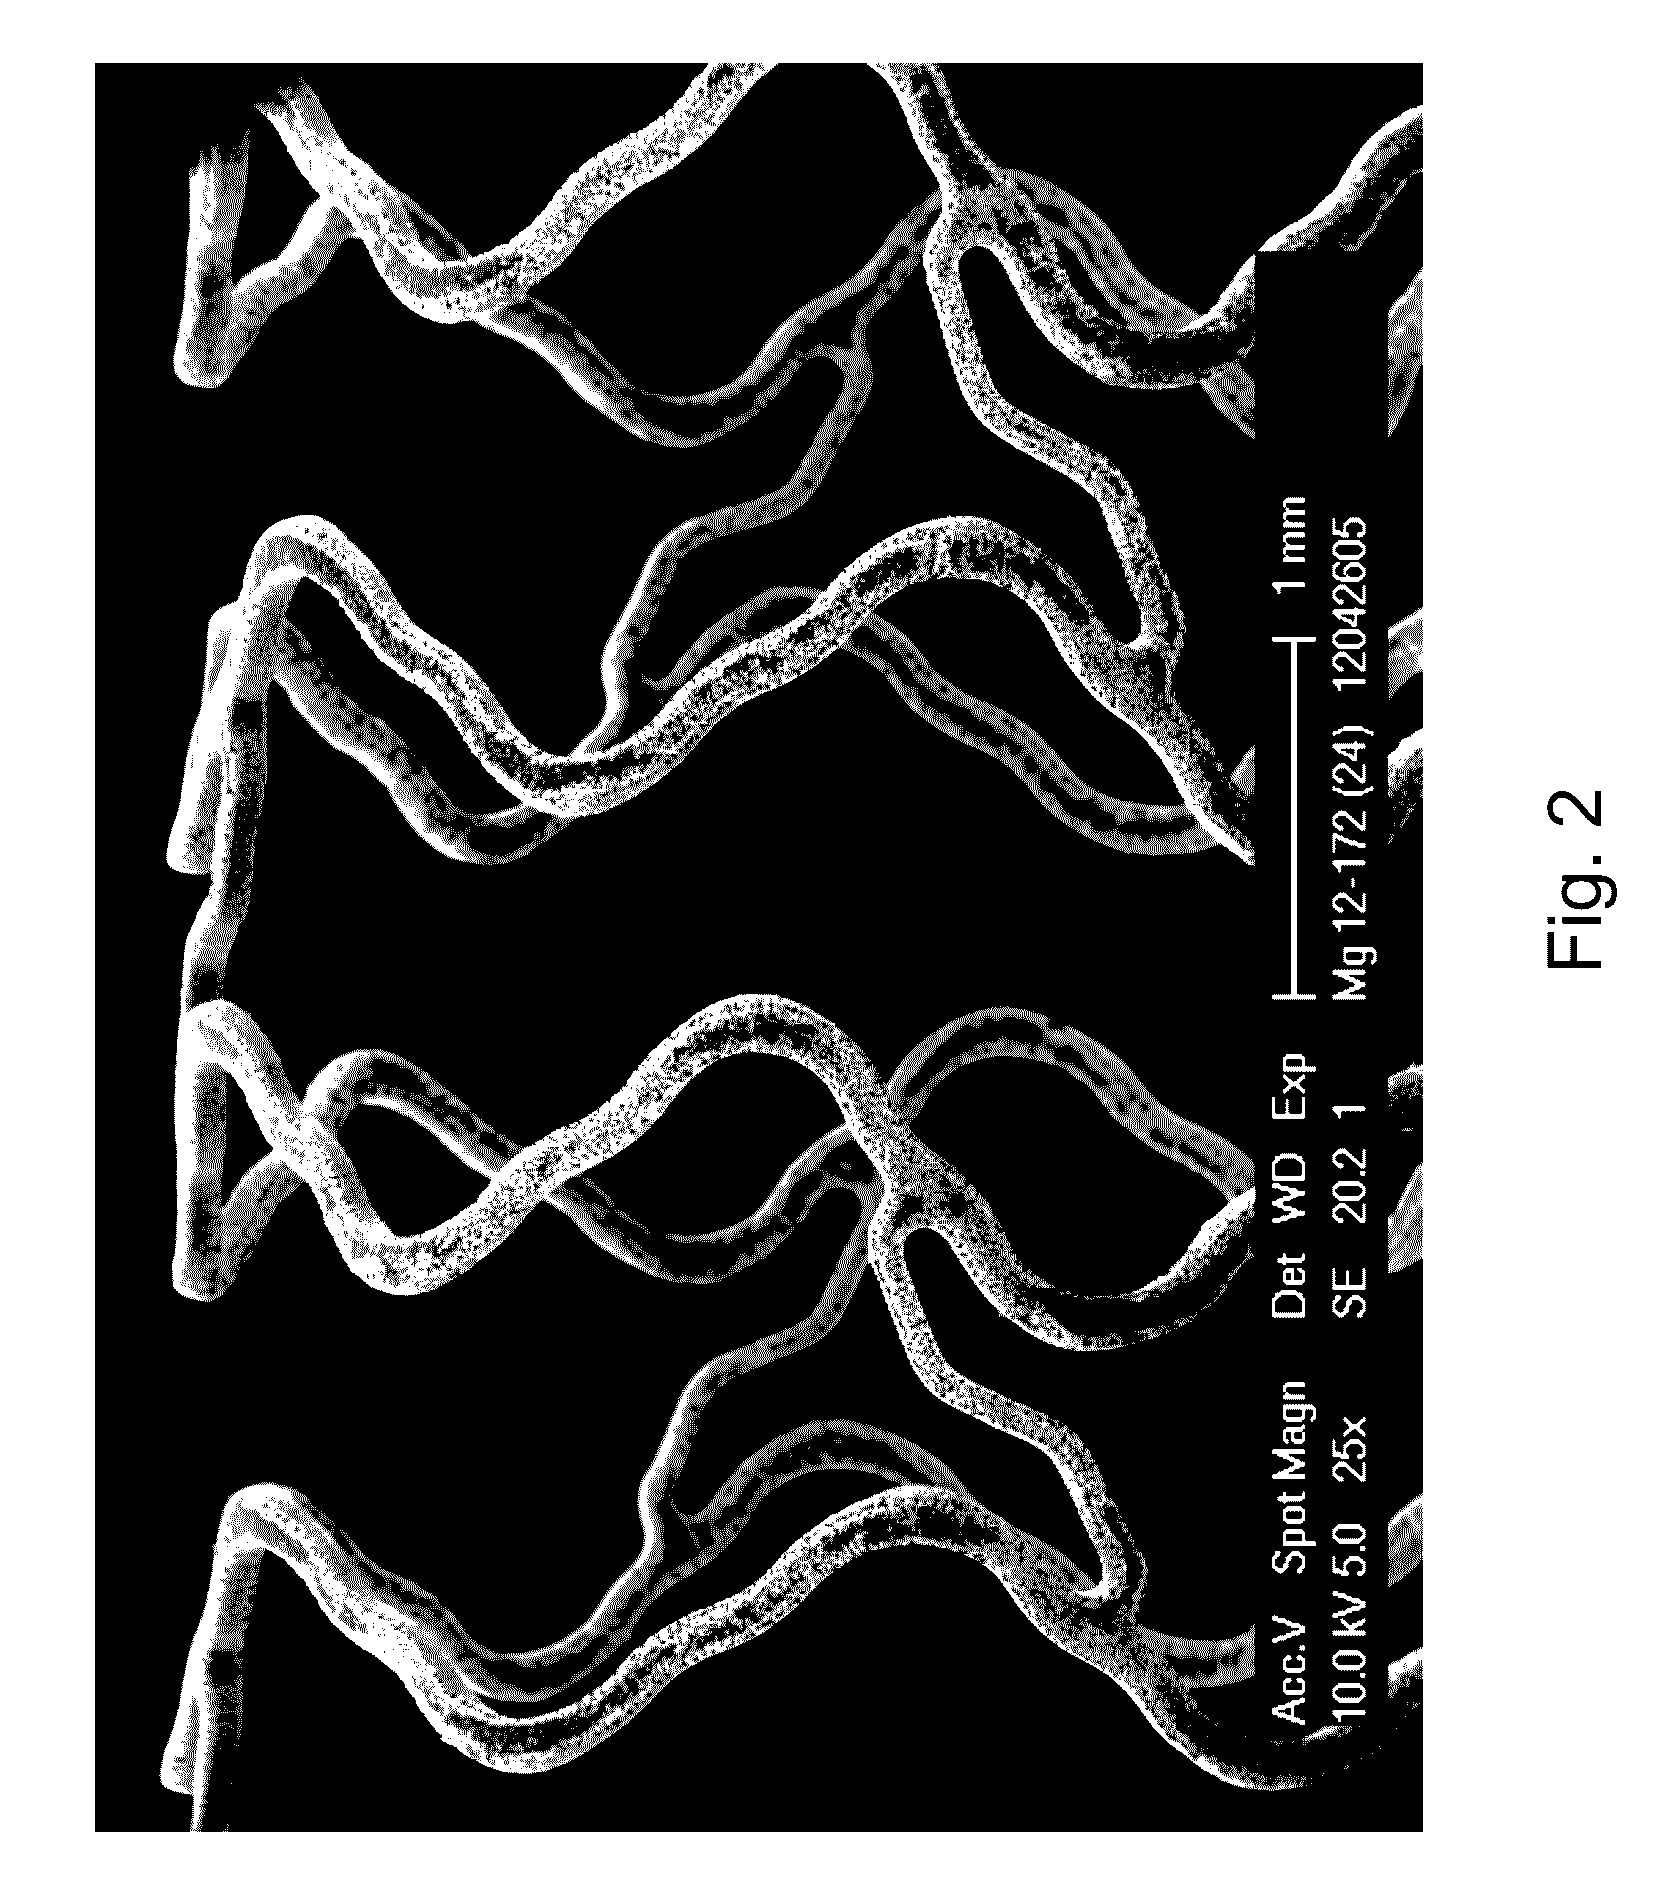 Microstructured absorbable implant